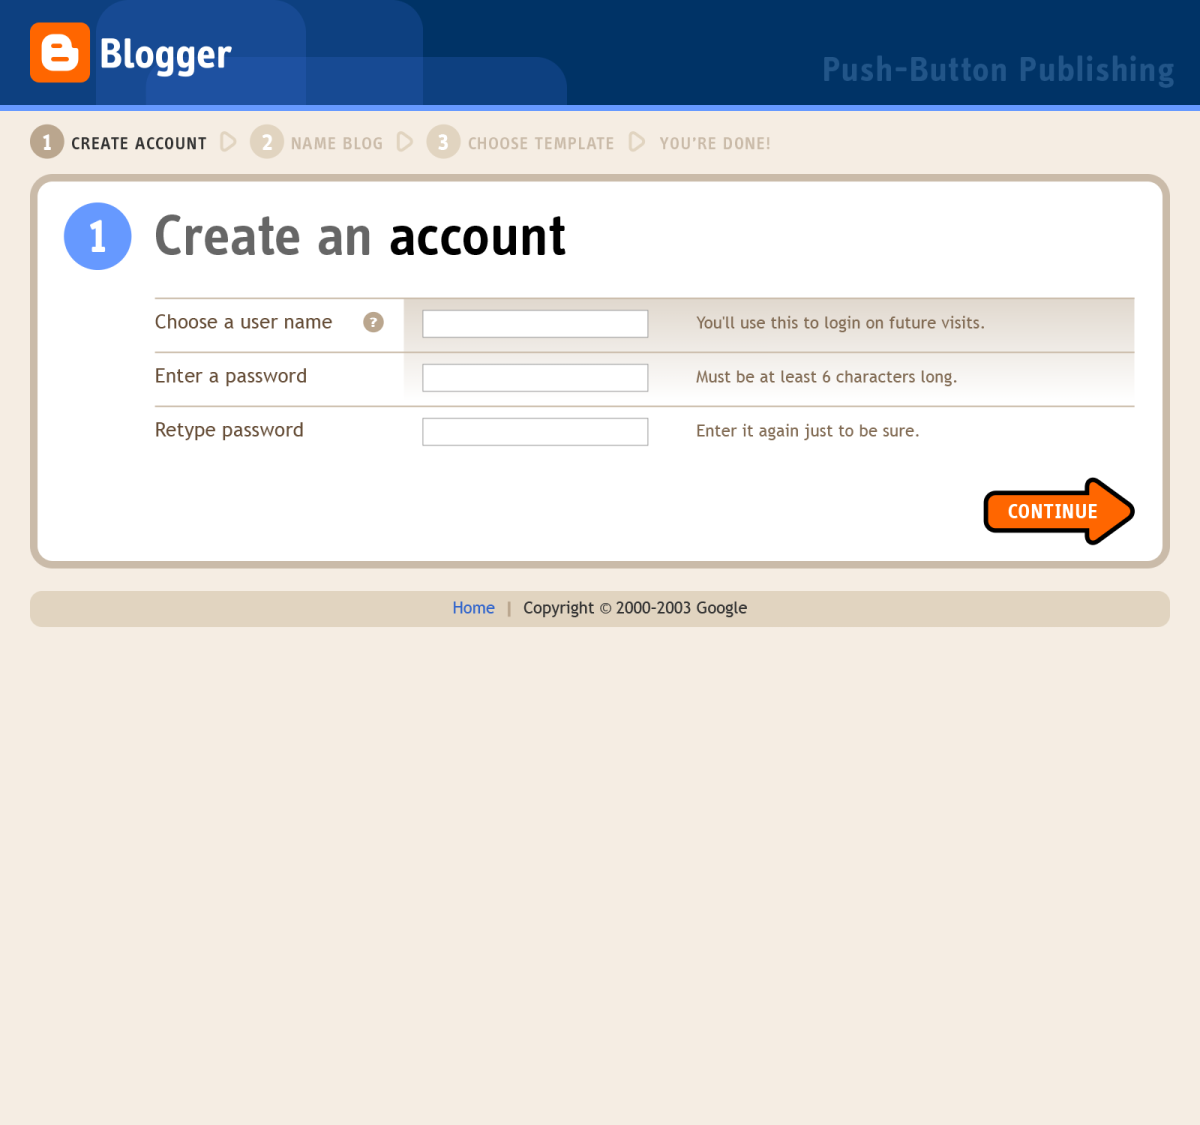 Blogger registration flow, step 1 (Create an account)